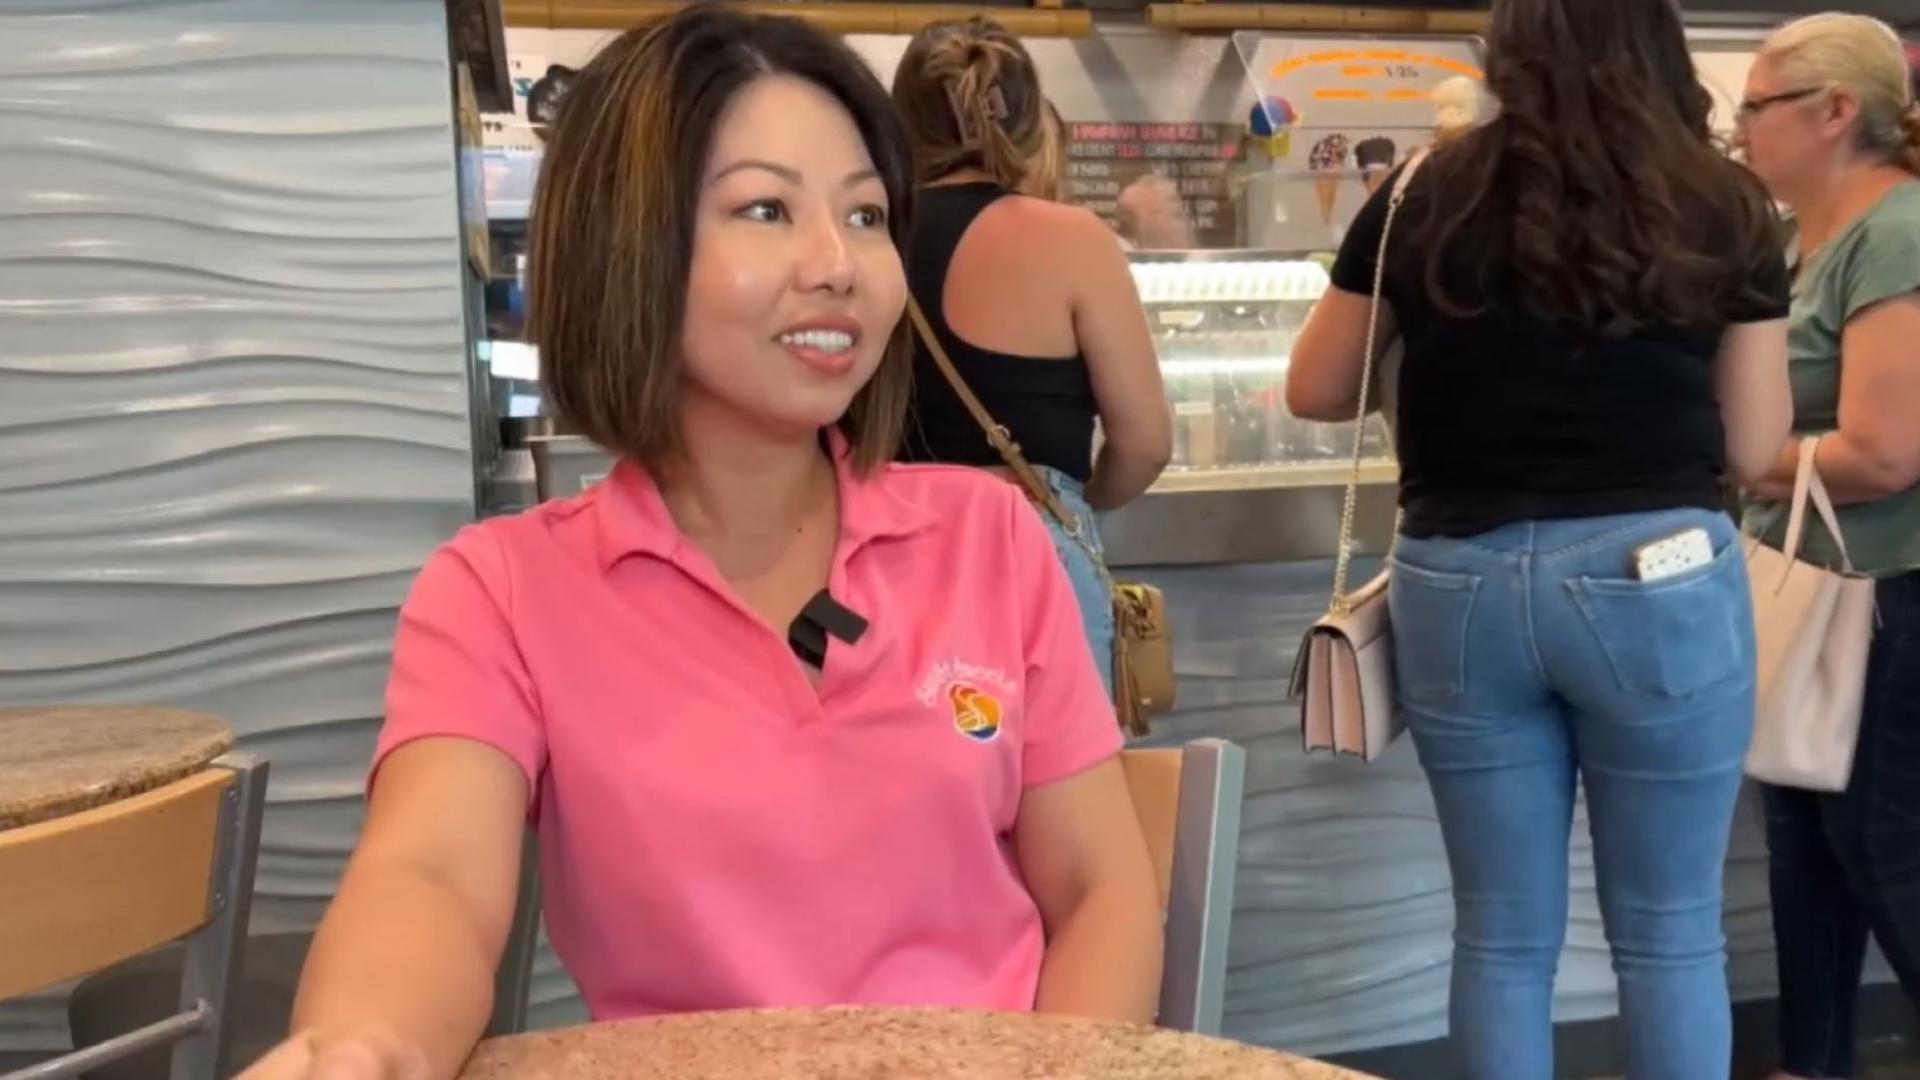 Growing up in Vietnam, the owner of Sunset Sweets in Stockton dreamed to open her own business in the United States.